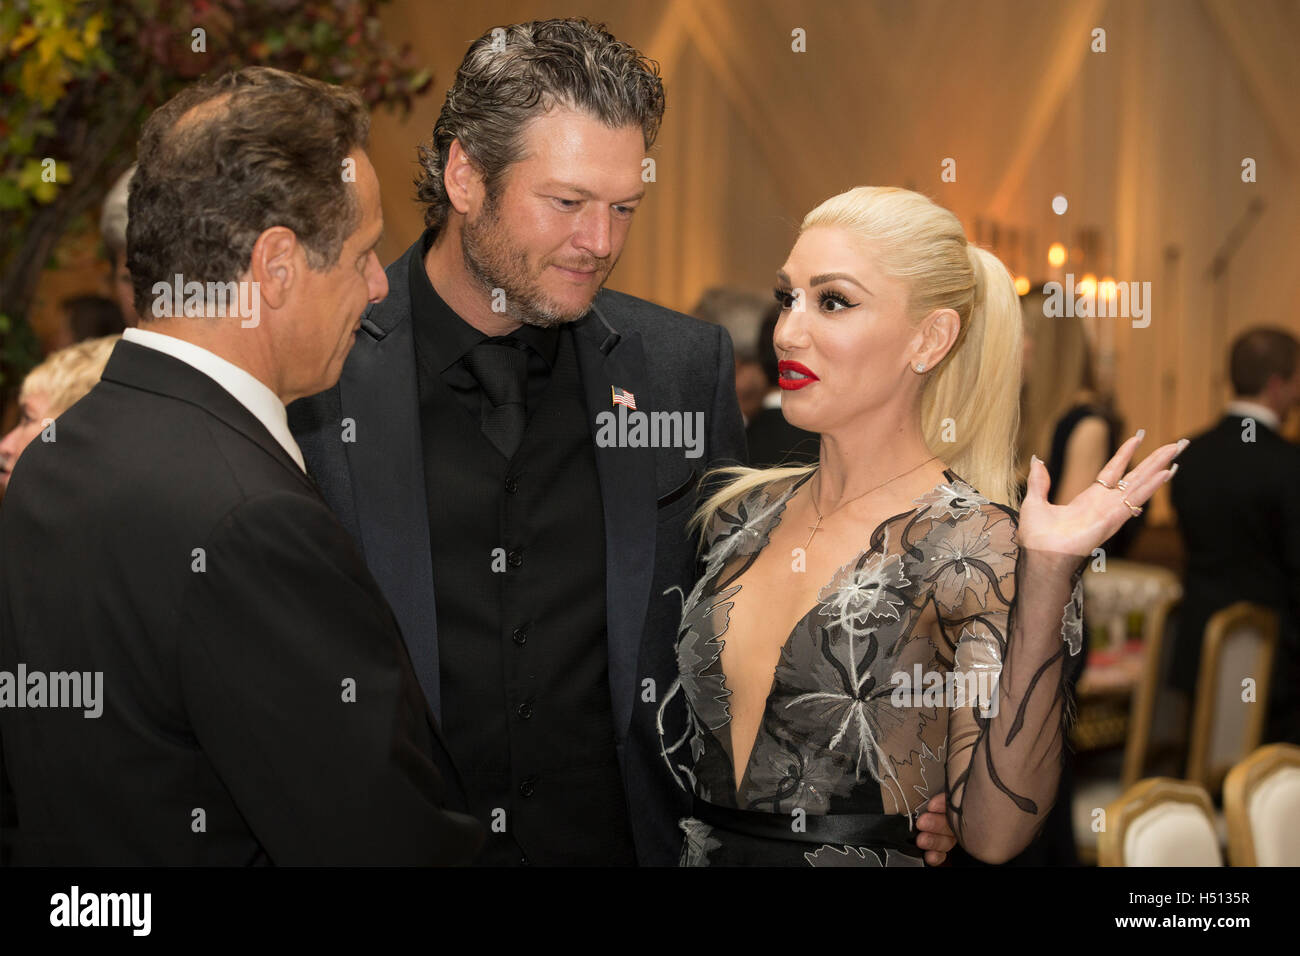 US entertainer Gwen Stefani (R), US entertainer Blake Shelton (C) and New York Governor Andrew Cuomo (L) attend a state dinner for Italian Prime Minister Matteo Renzi, hosted by US President Barack Obama, on the South Lawn of the White House in Washington DC, USA, 18 October 2016. President Obama hosts his final state dinner, featuring celebrity chef Mario Batali and singer Gwen Stefani performing after dinner. Credit: Michael Reynolds/Pool via CNP/MediaPunch Stock Photo